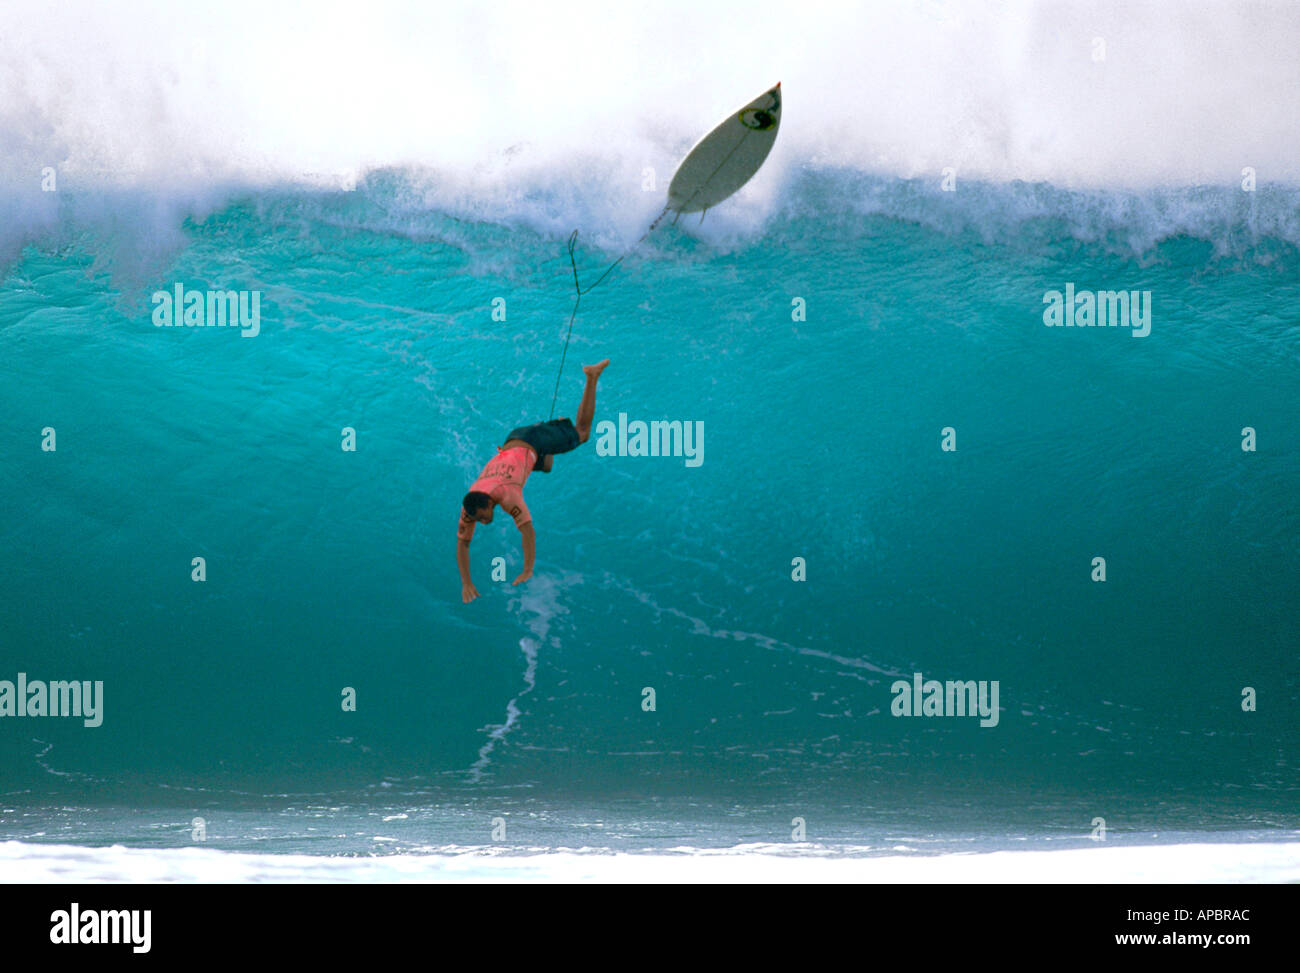 Surfing wipeout in wave, Sunny Garcia, Hawaii, USA Stock Photo